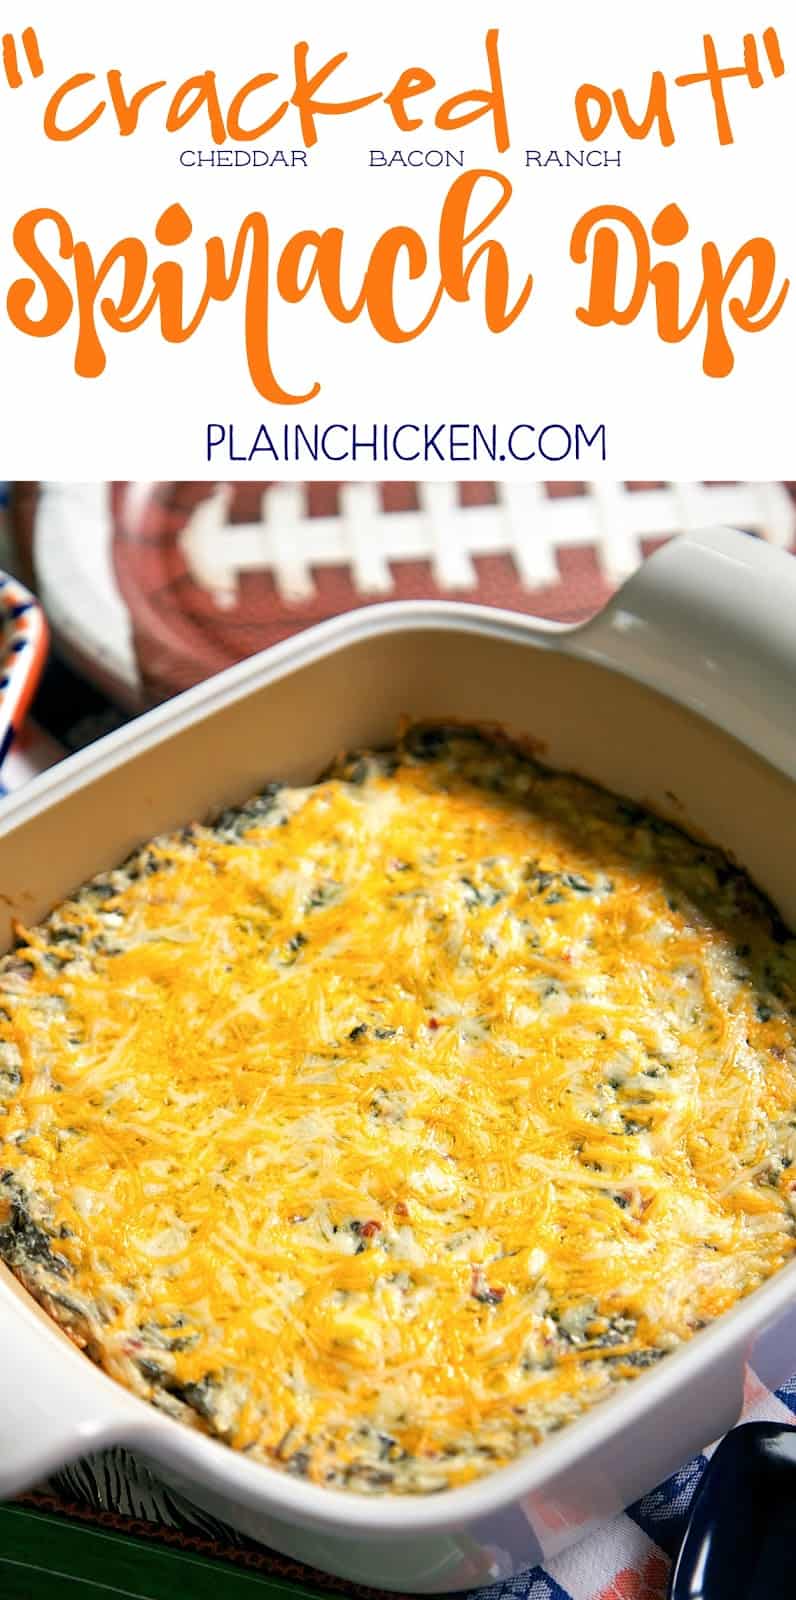 Cracked Out Spinach Dip - the BEST spinach dip EVER! Spinach, cheddar, bacon, Ranch, cream cheese and sour cream. This stuff is so addictive! Great for parties and tailgating! Everyone asks for the recipe!!